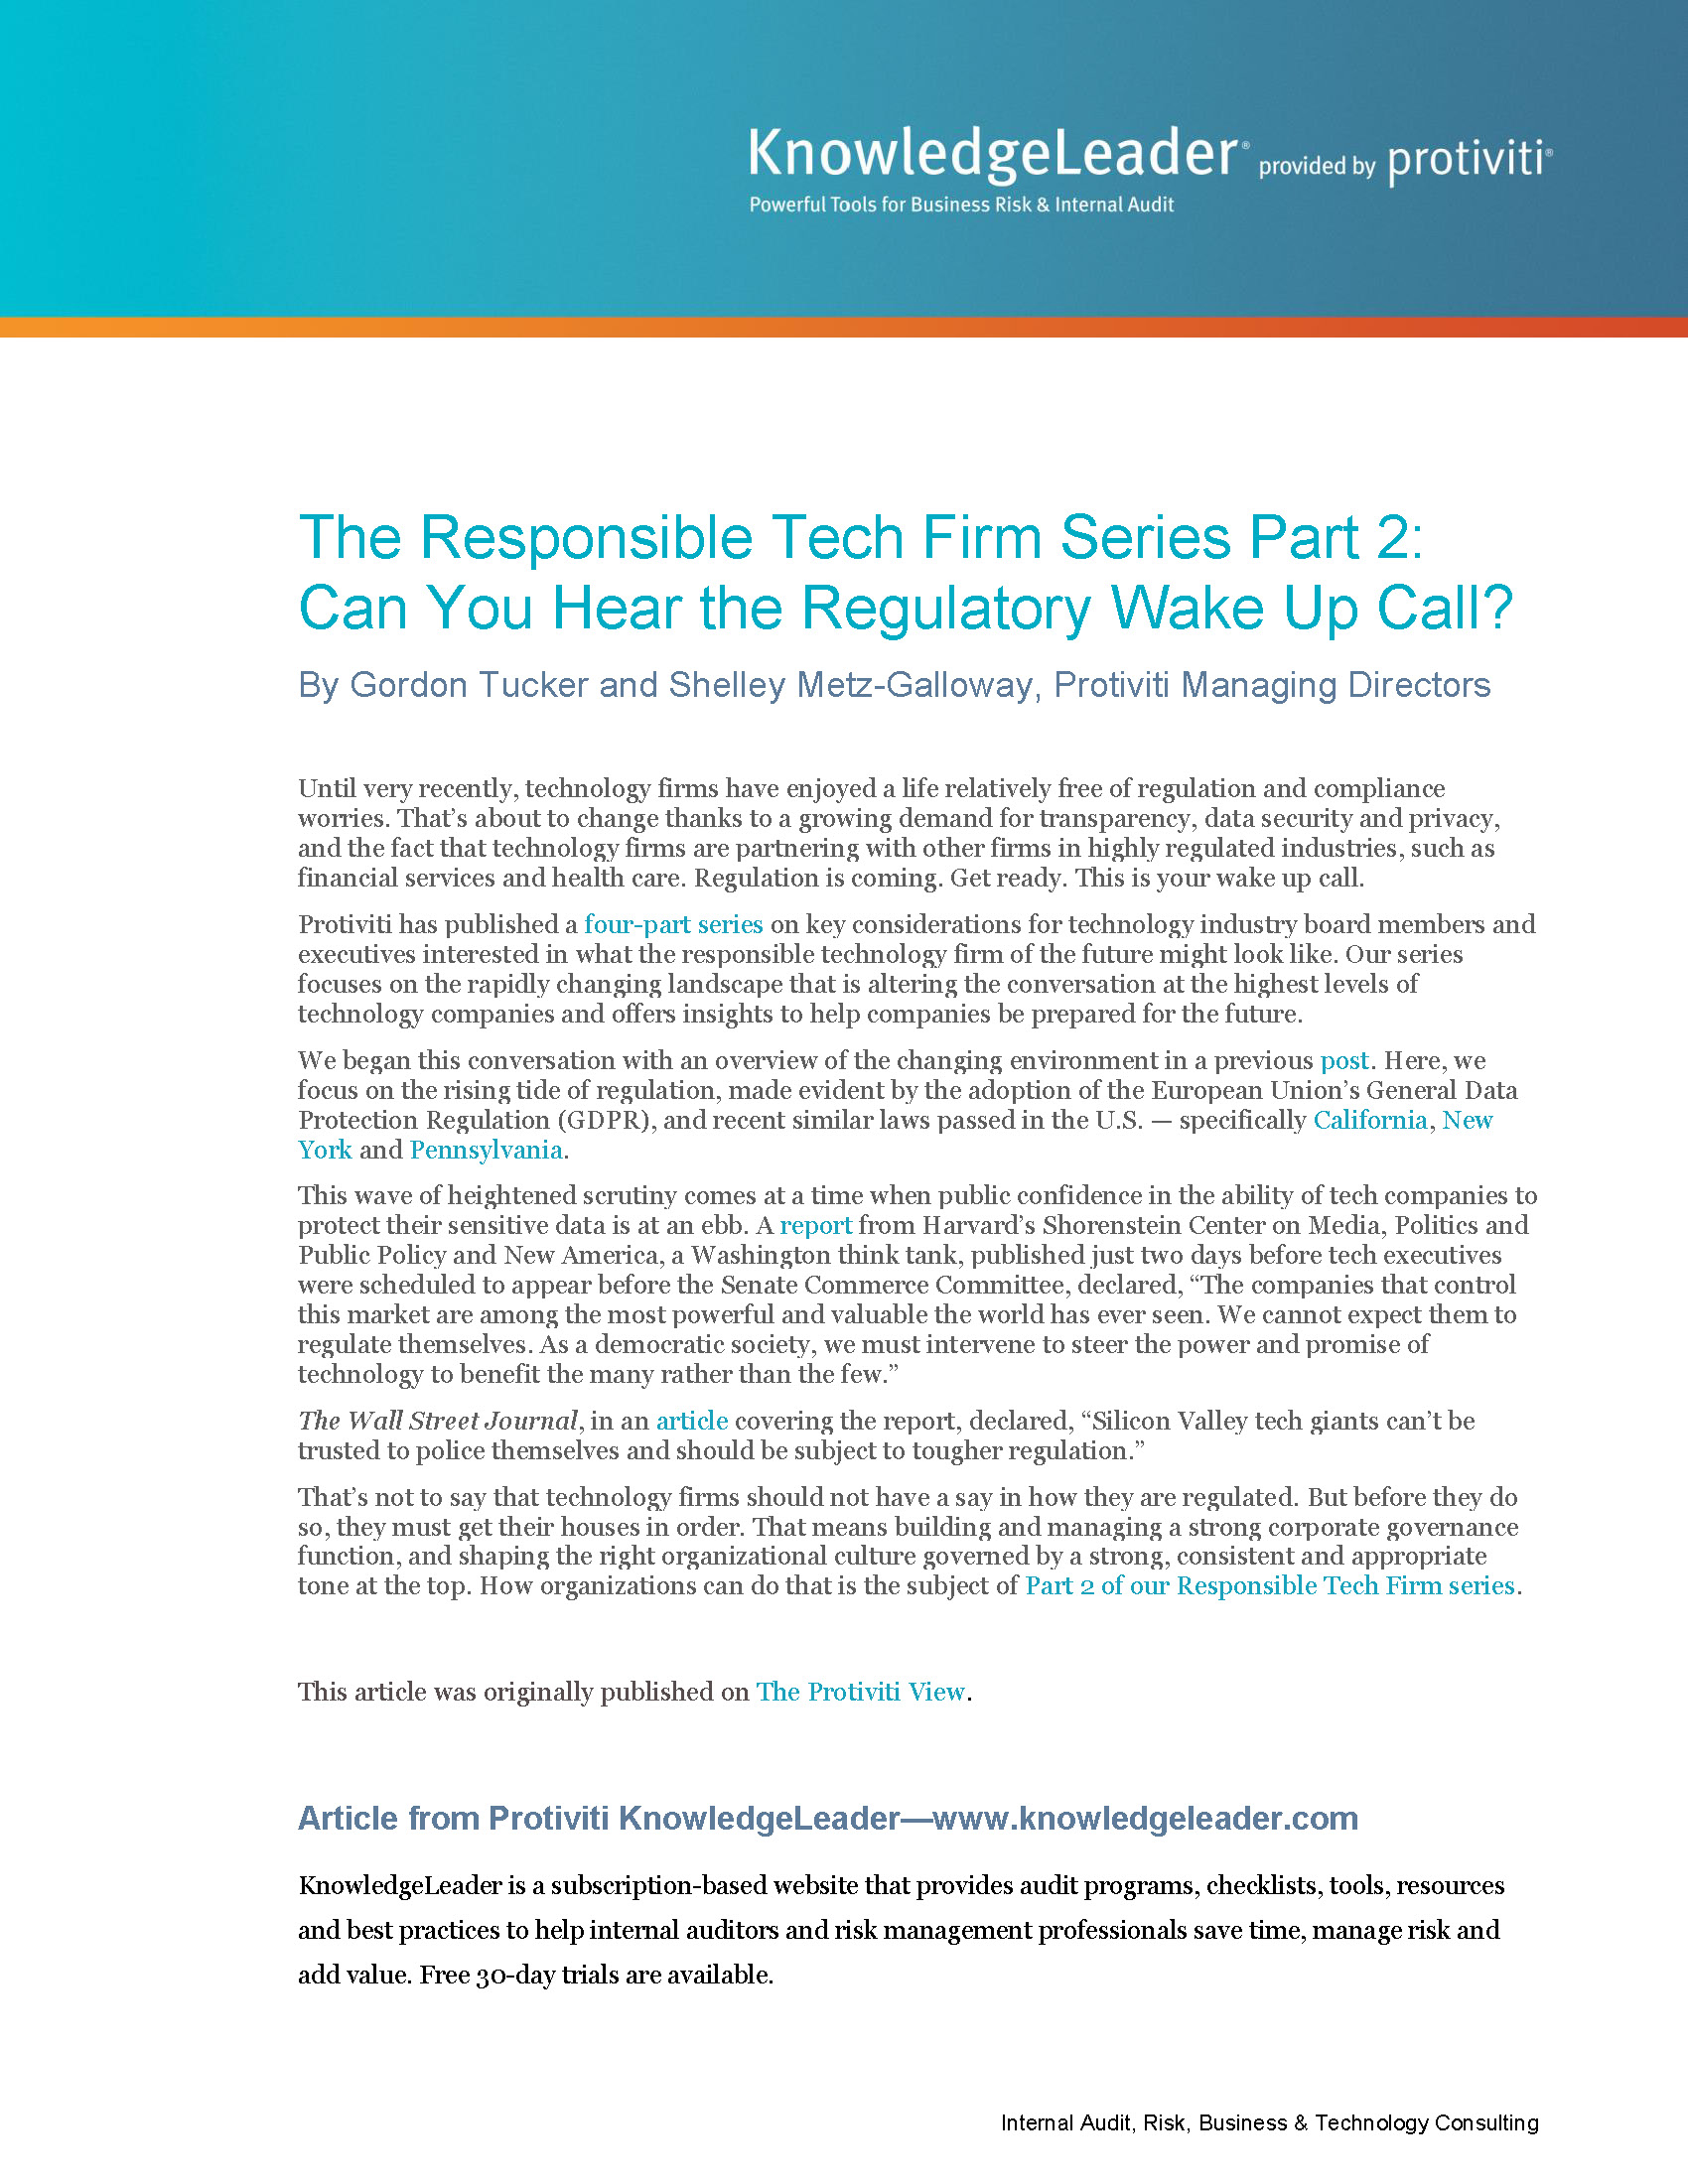 Screenshot of the first page of The Responsible Tech Firm Series Part 2 Can You Hear the Regulatory Wake Up Call